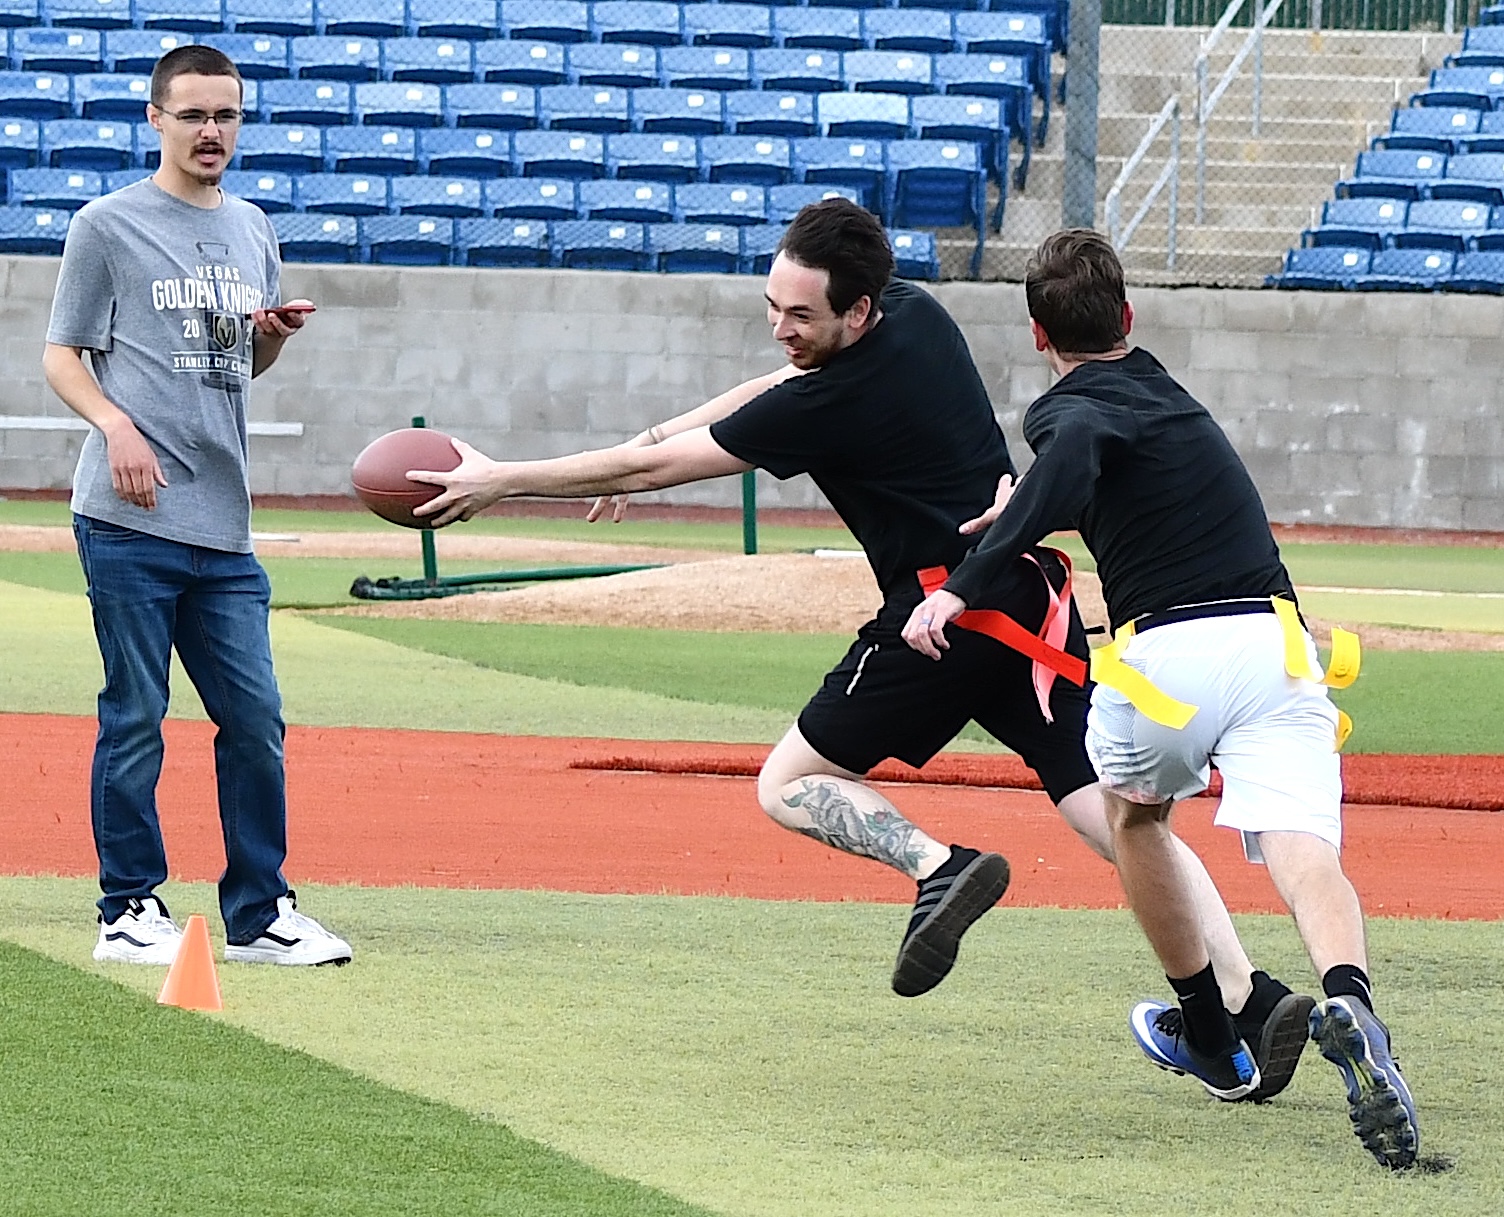 The spring flag football games presented by First Year Experience provided a competitive and spirited outlet for students and staff on April 25.